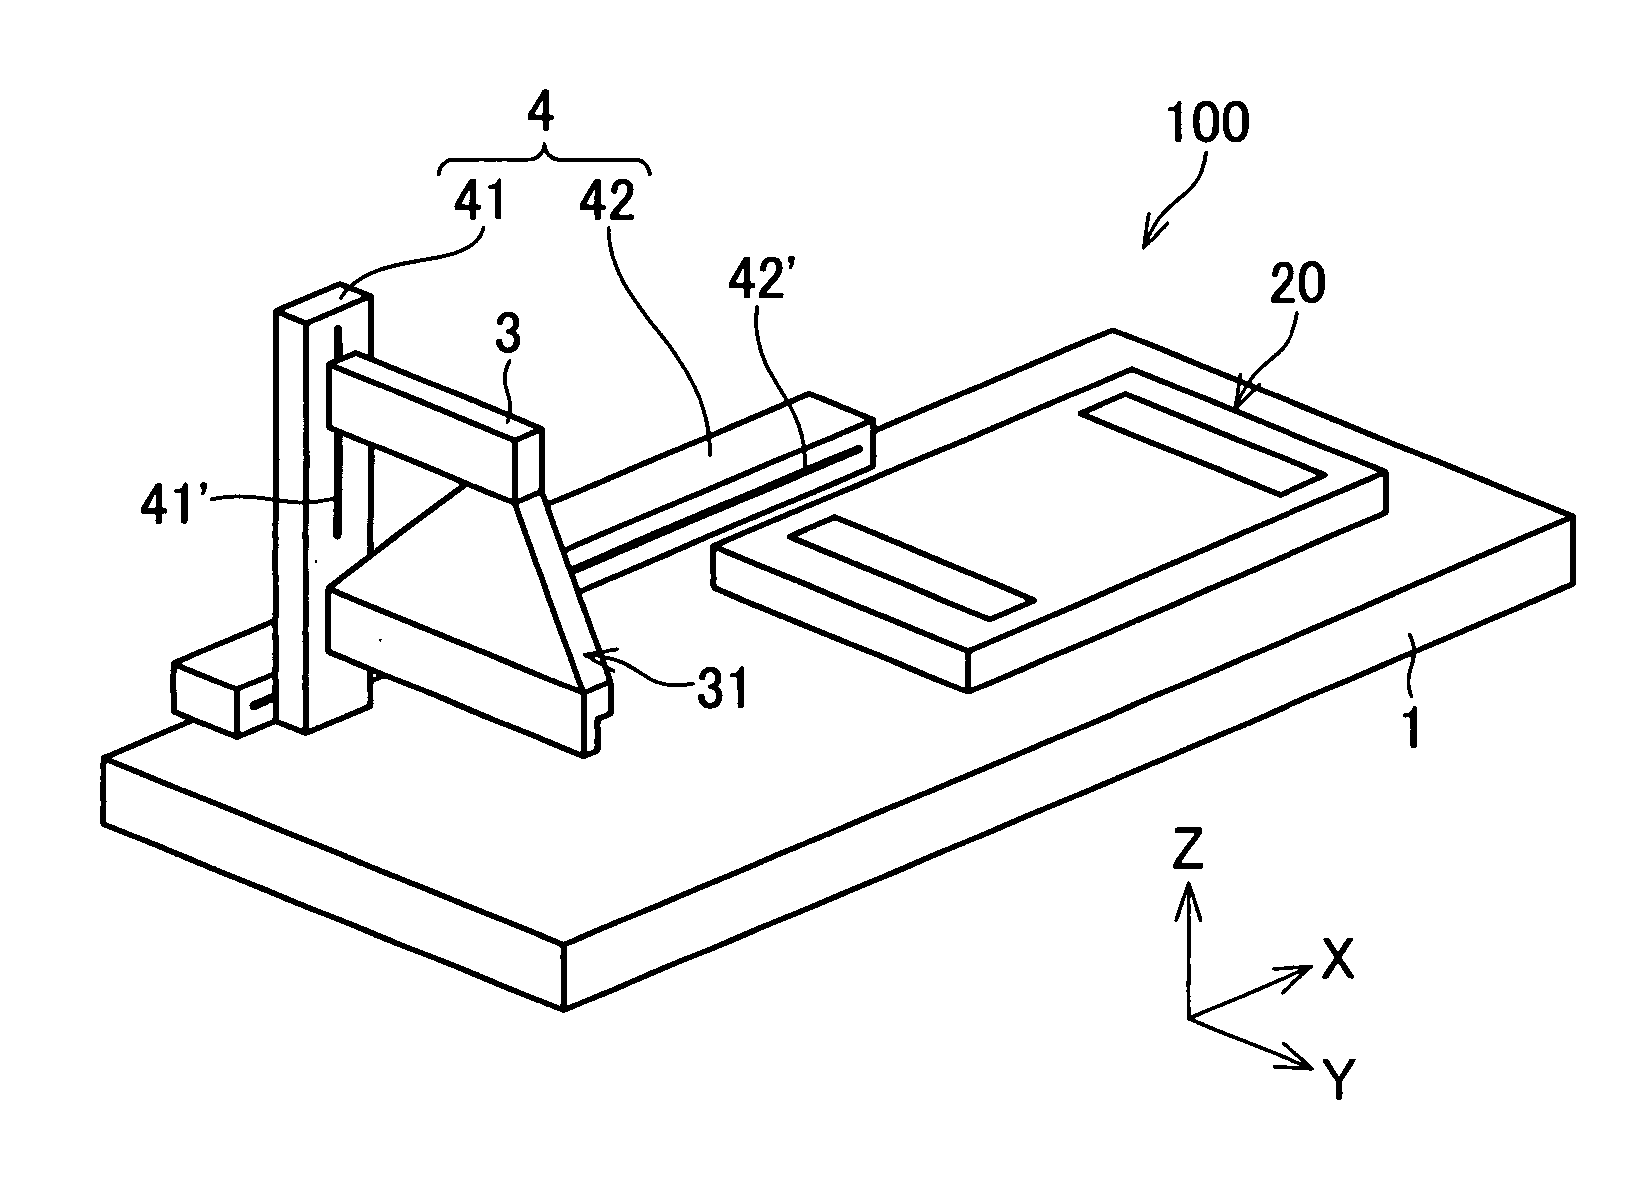 Automated two-dimensional electrophoresis apparatus and instrument constituting the apparatus